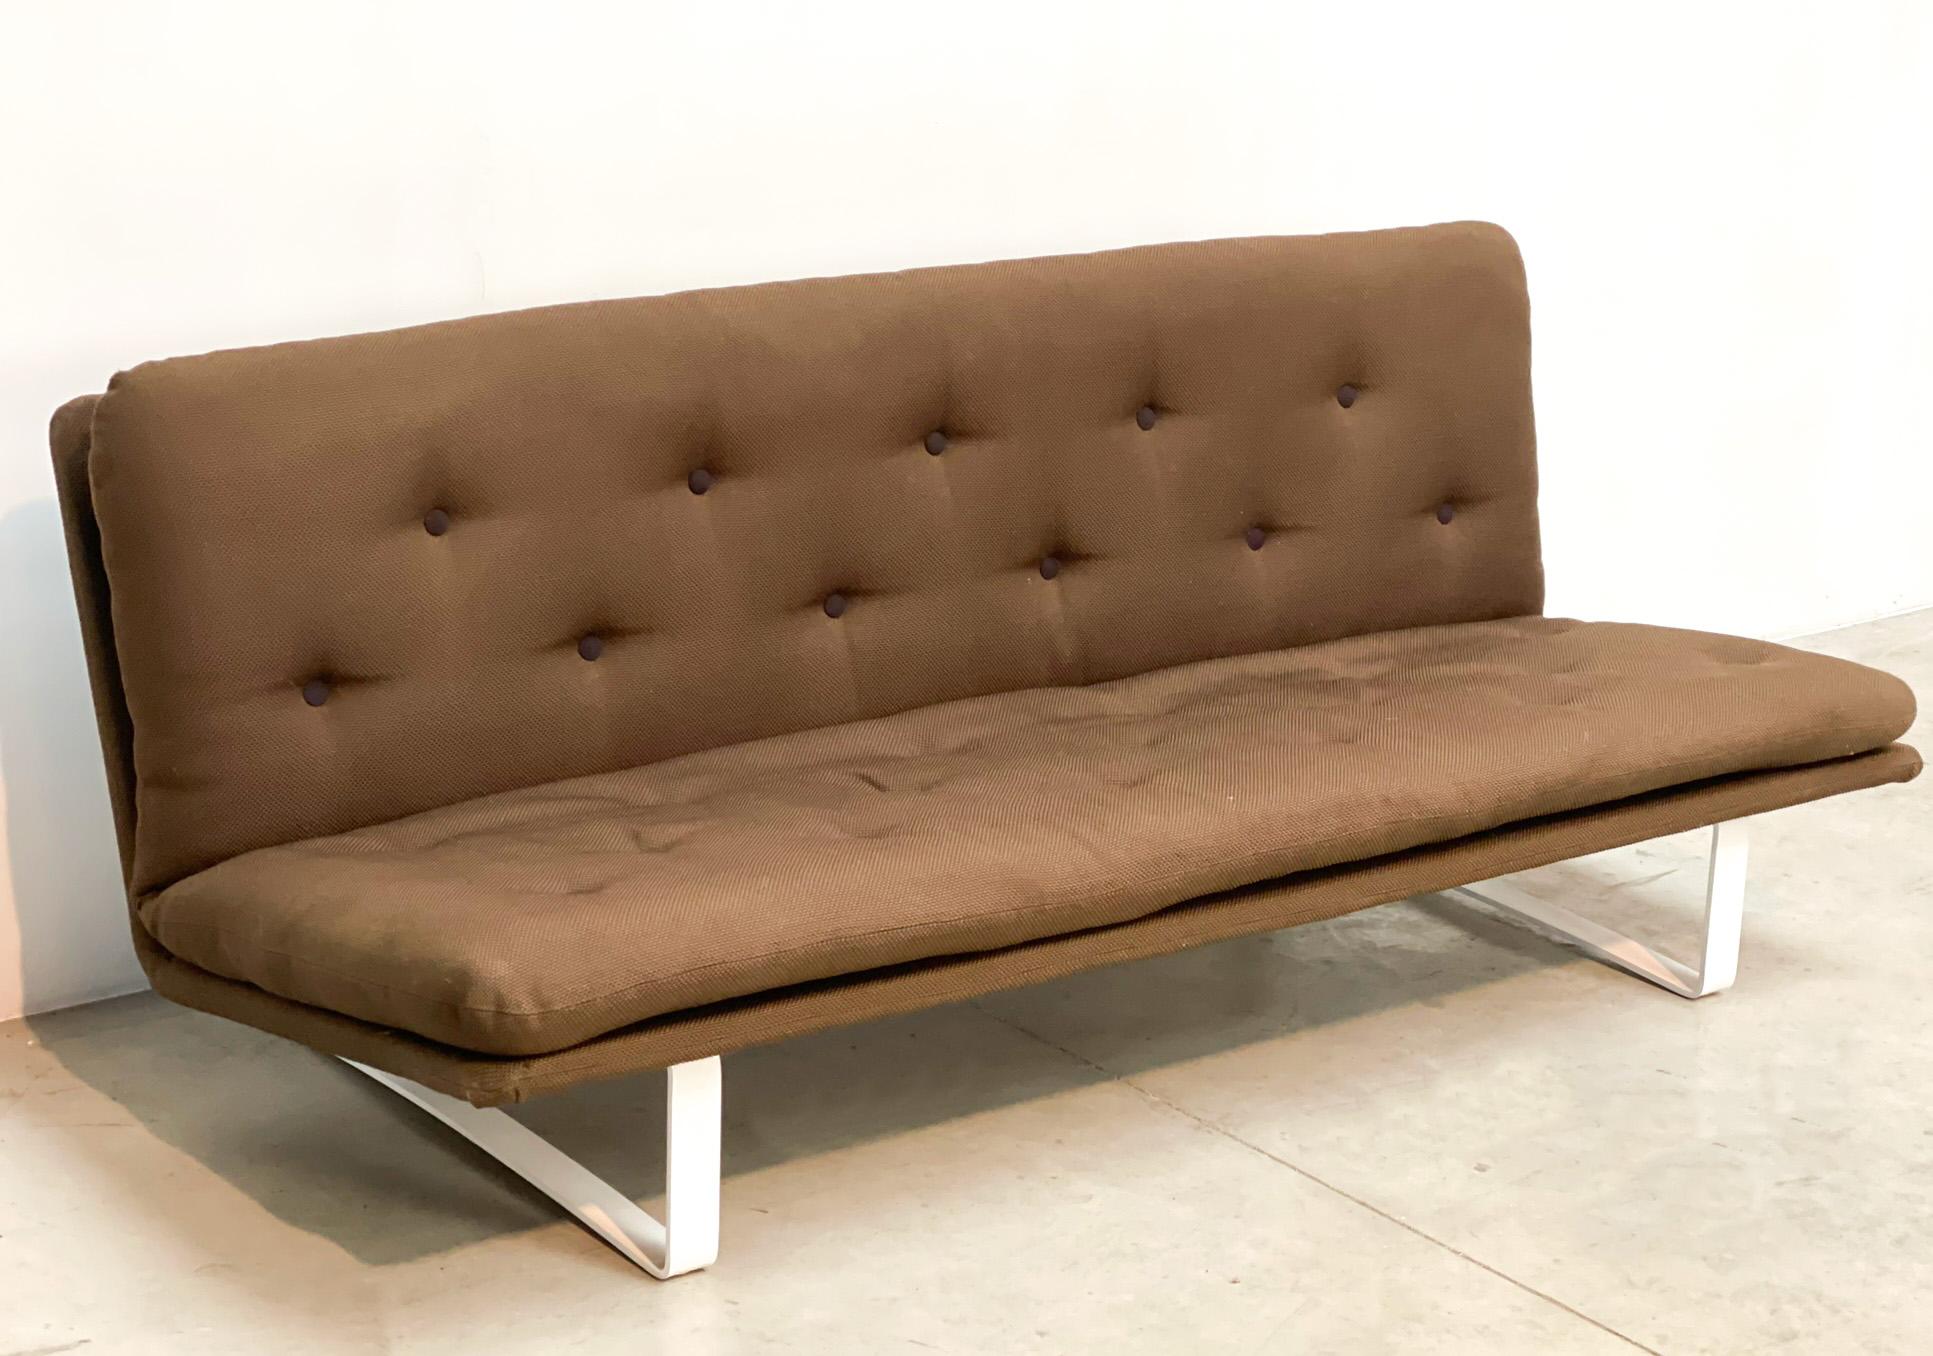 Late 20th Century Dutch Mid-Century Kho Liang Le Sofa for Artifort